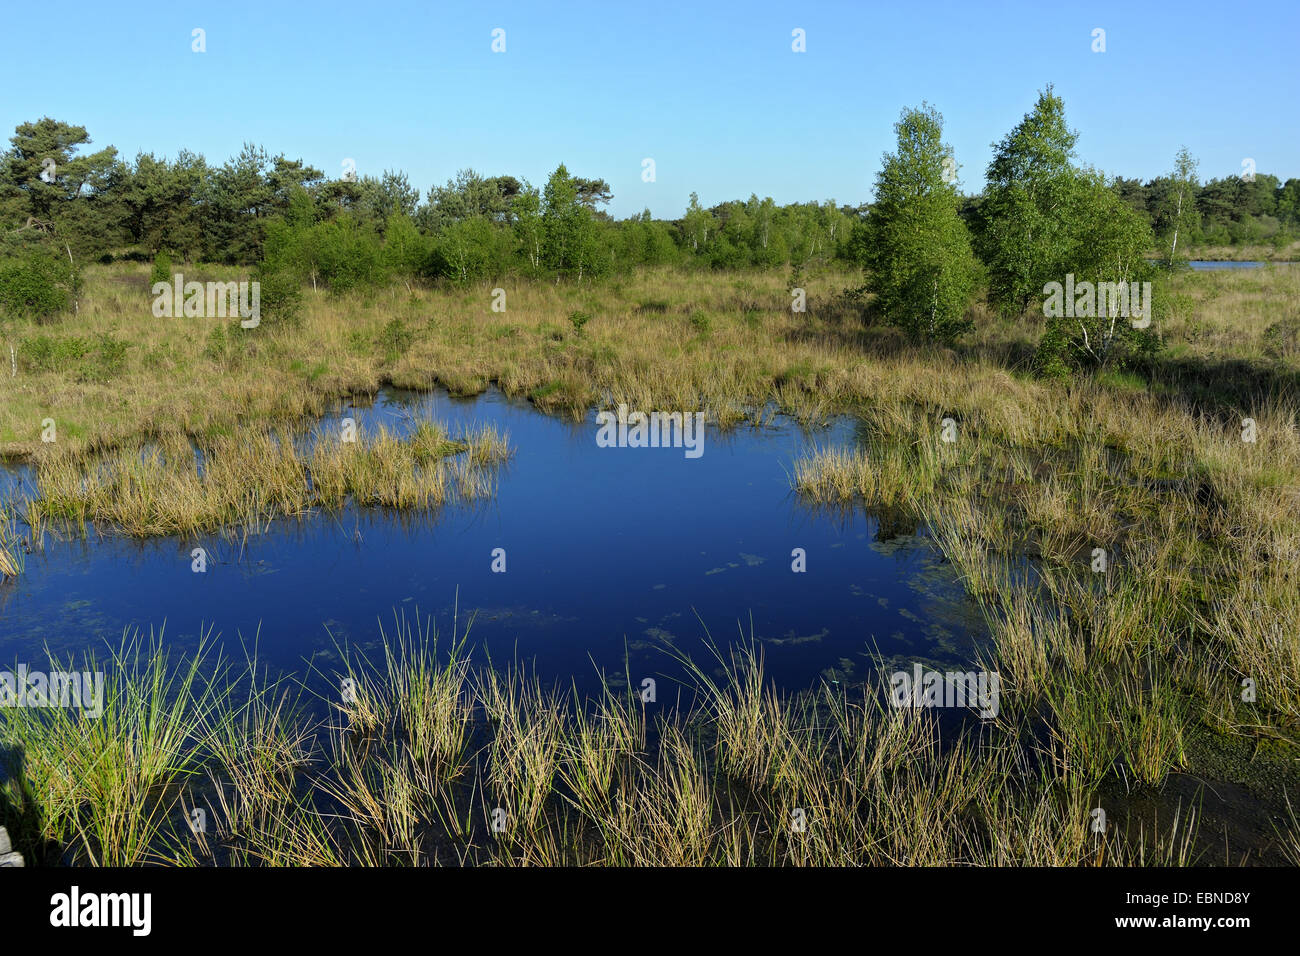 National Park Groote Peel, moorpond with peat moss and rushes, Netherlands, Limburg, Groote Peel Stock Photo